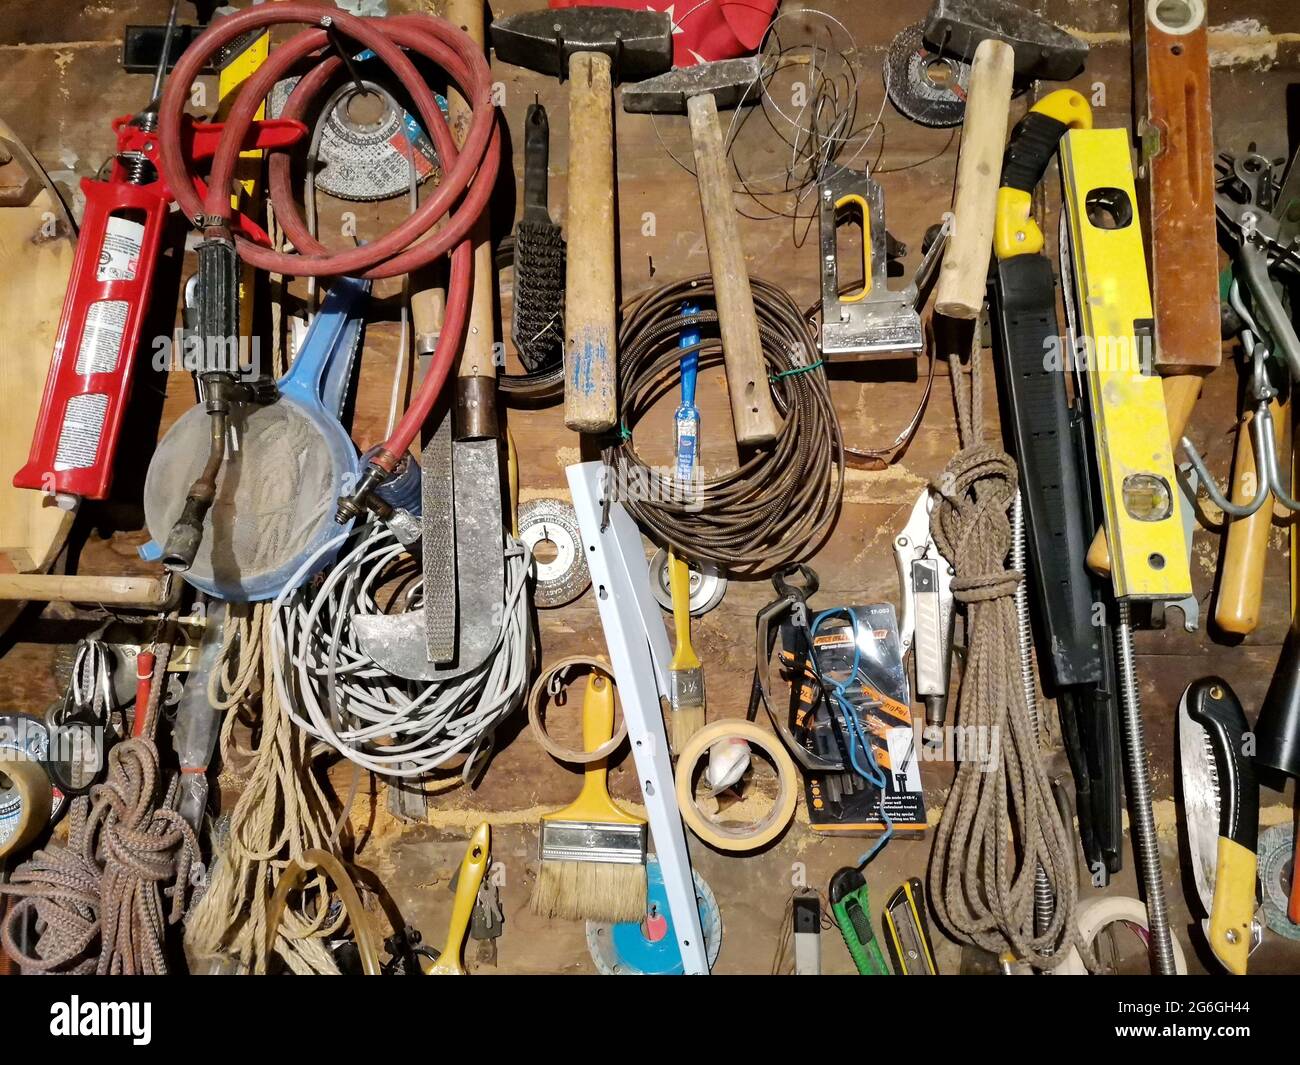 Hardware material. Hardware materials. Hammer, rope, saw. Stock Photo